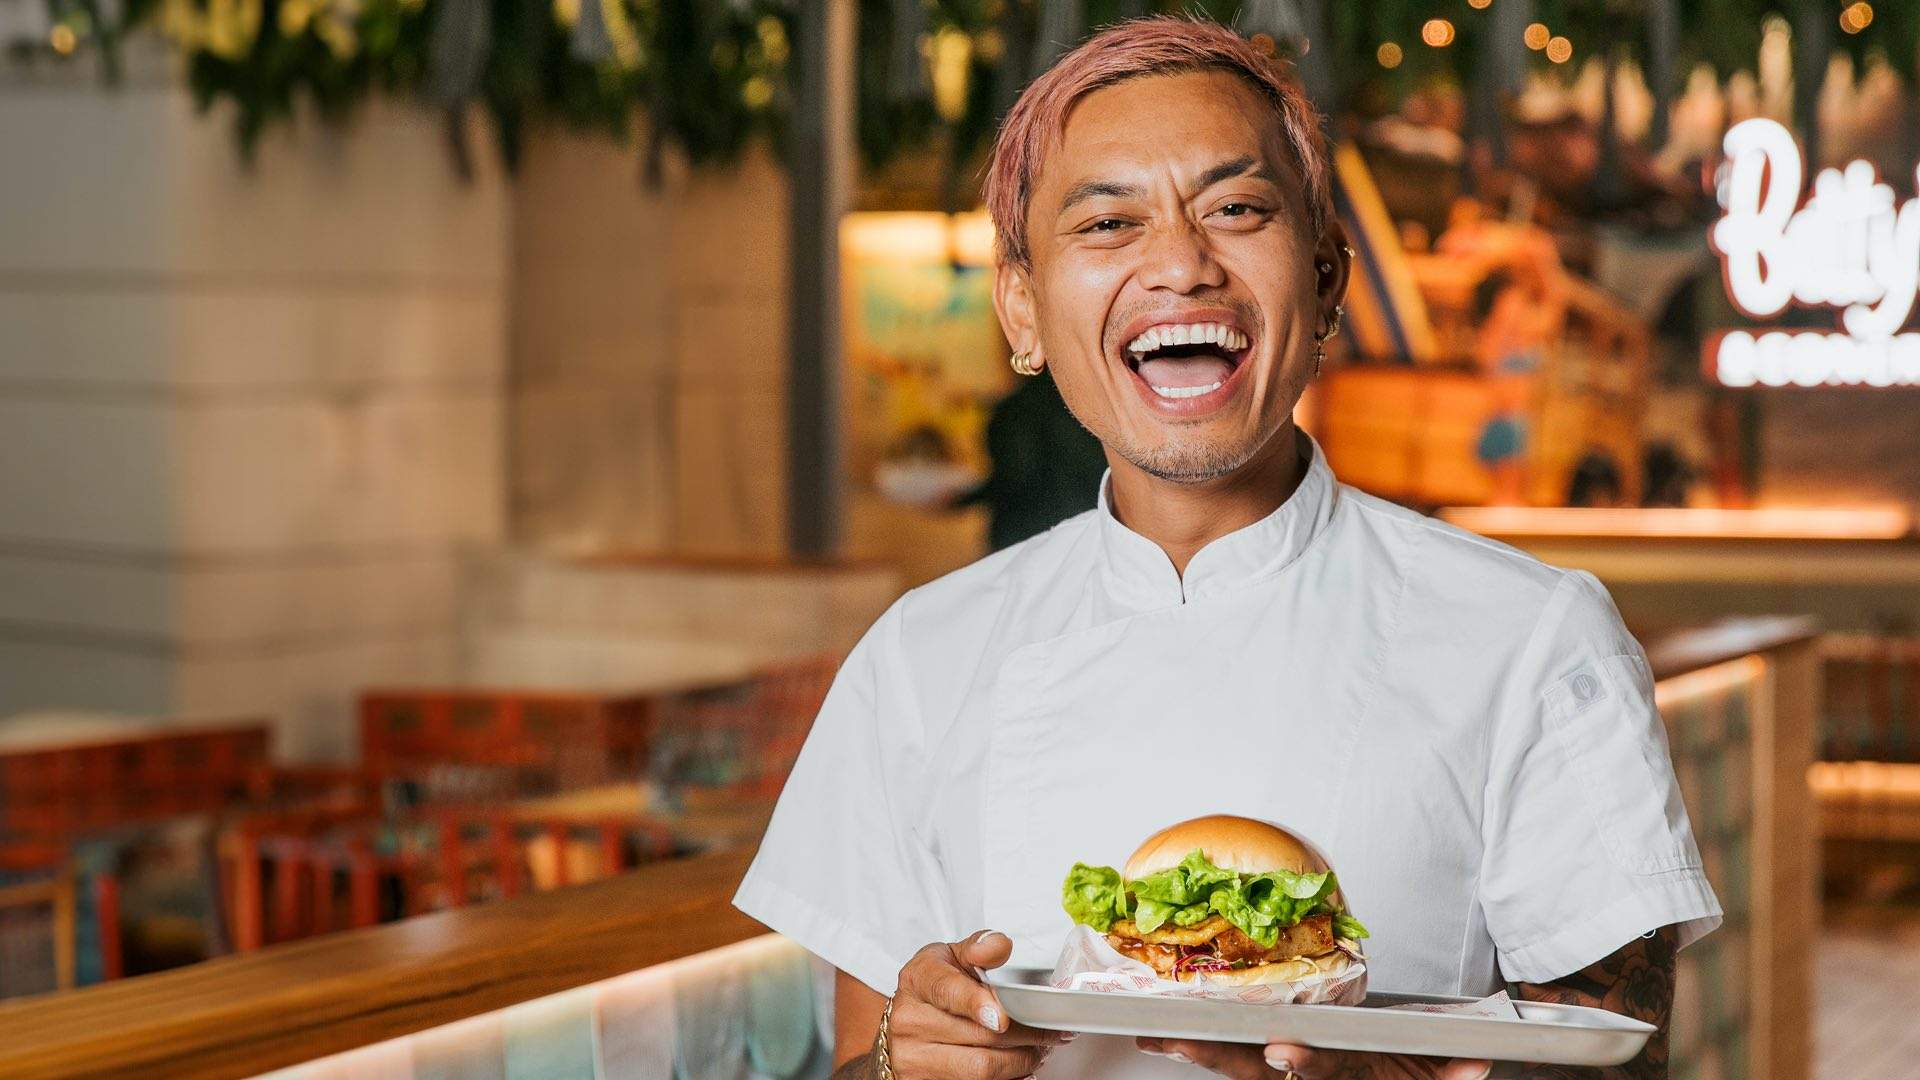 You Can Now Try Betty's Burgers' Glazed Pork Belly Burger Created by 'MasterChef' Favourite Khanh Ong